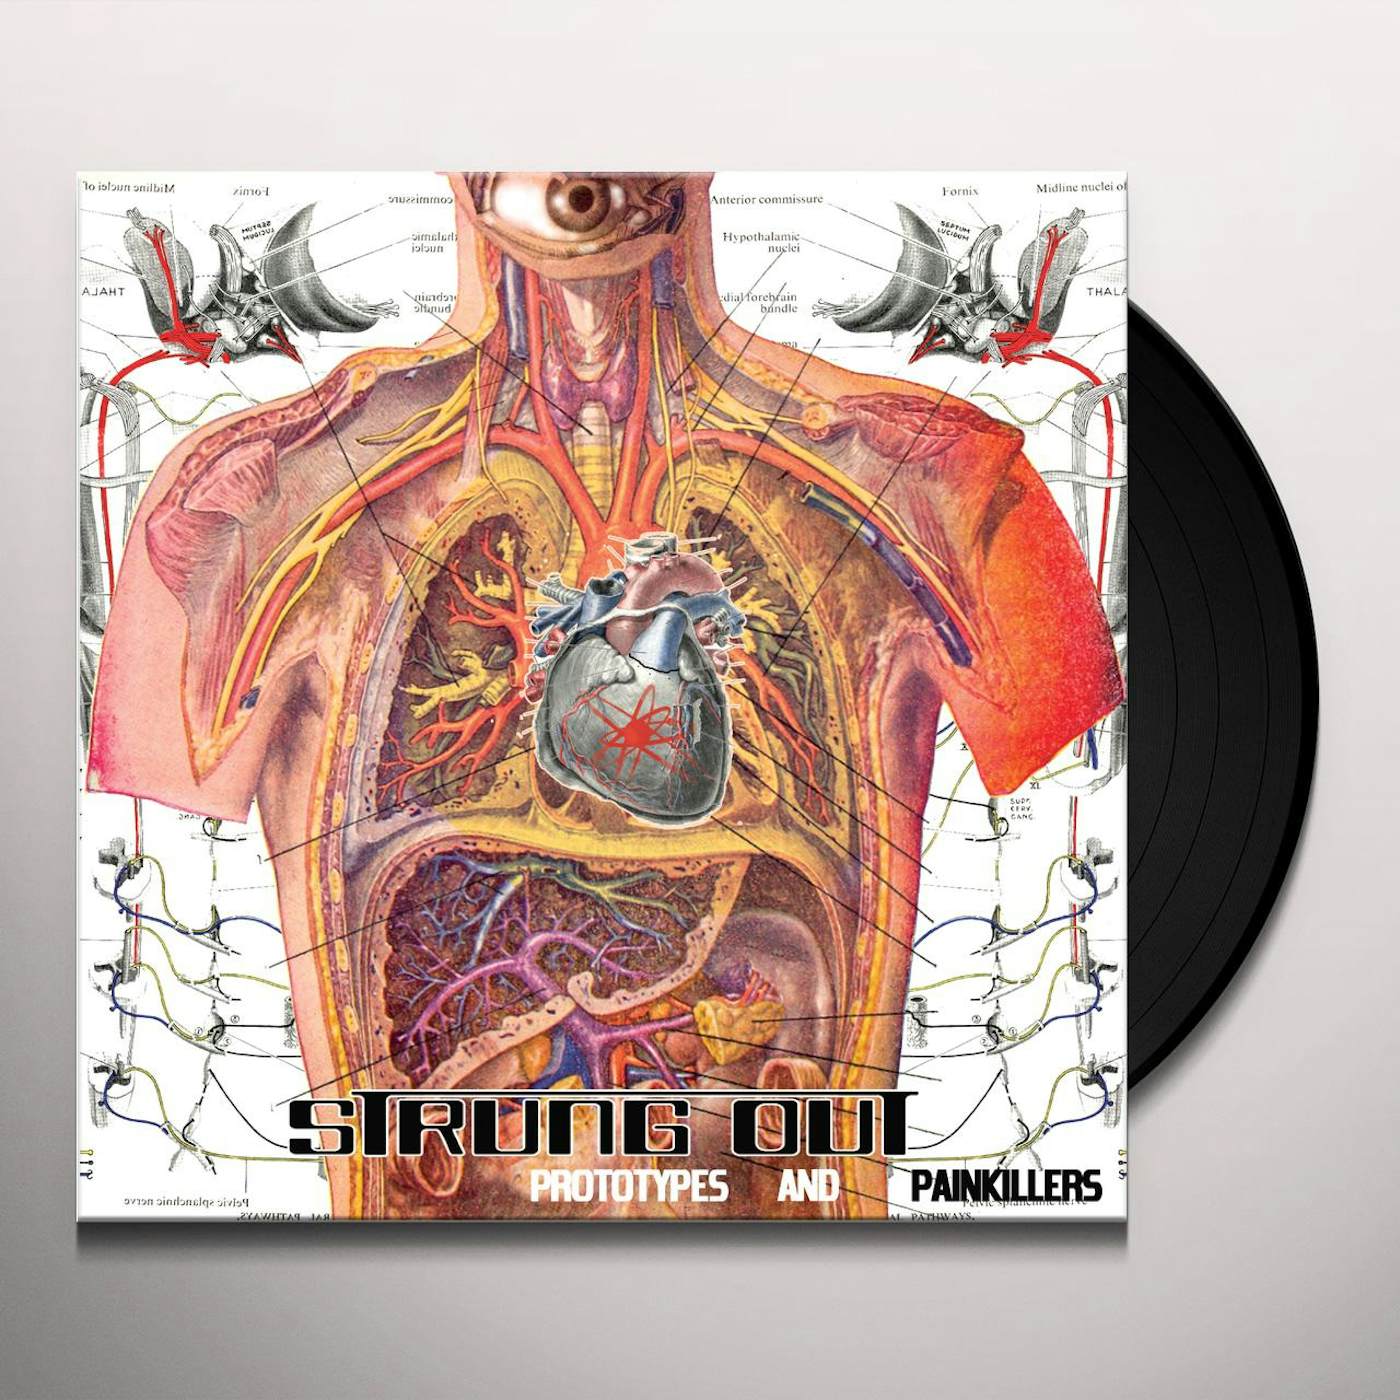 Strung Out Prototypes and Painkillers Vinyl Record